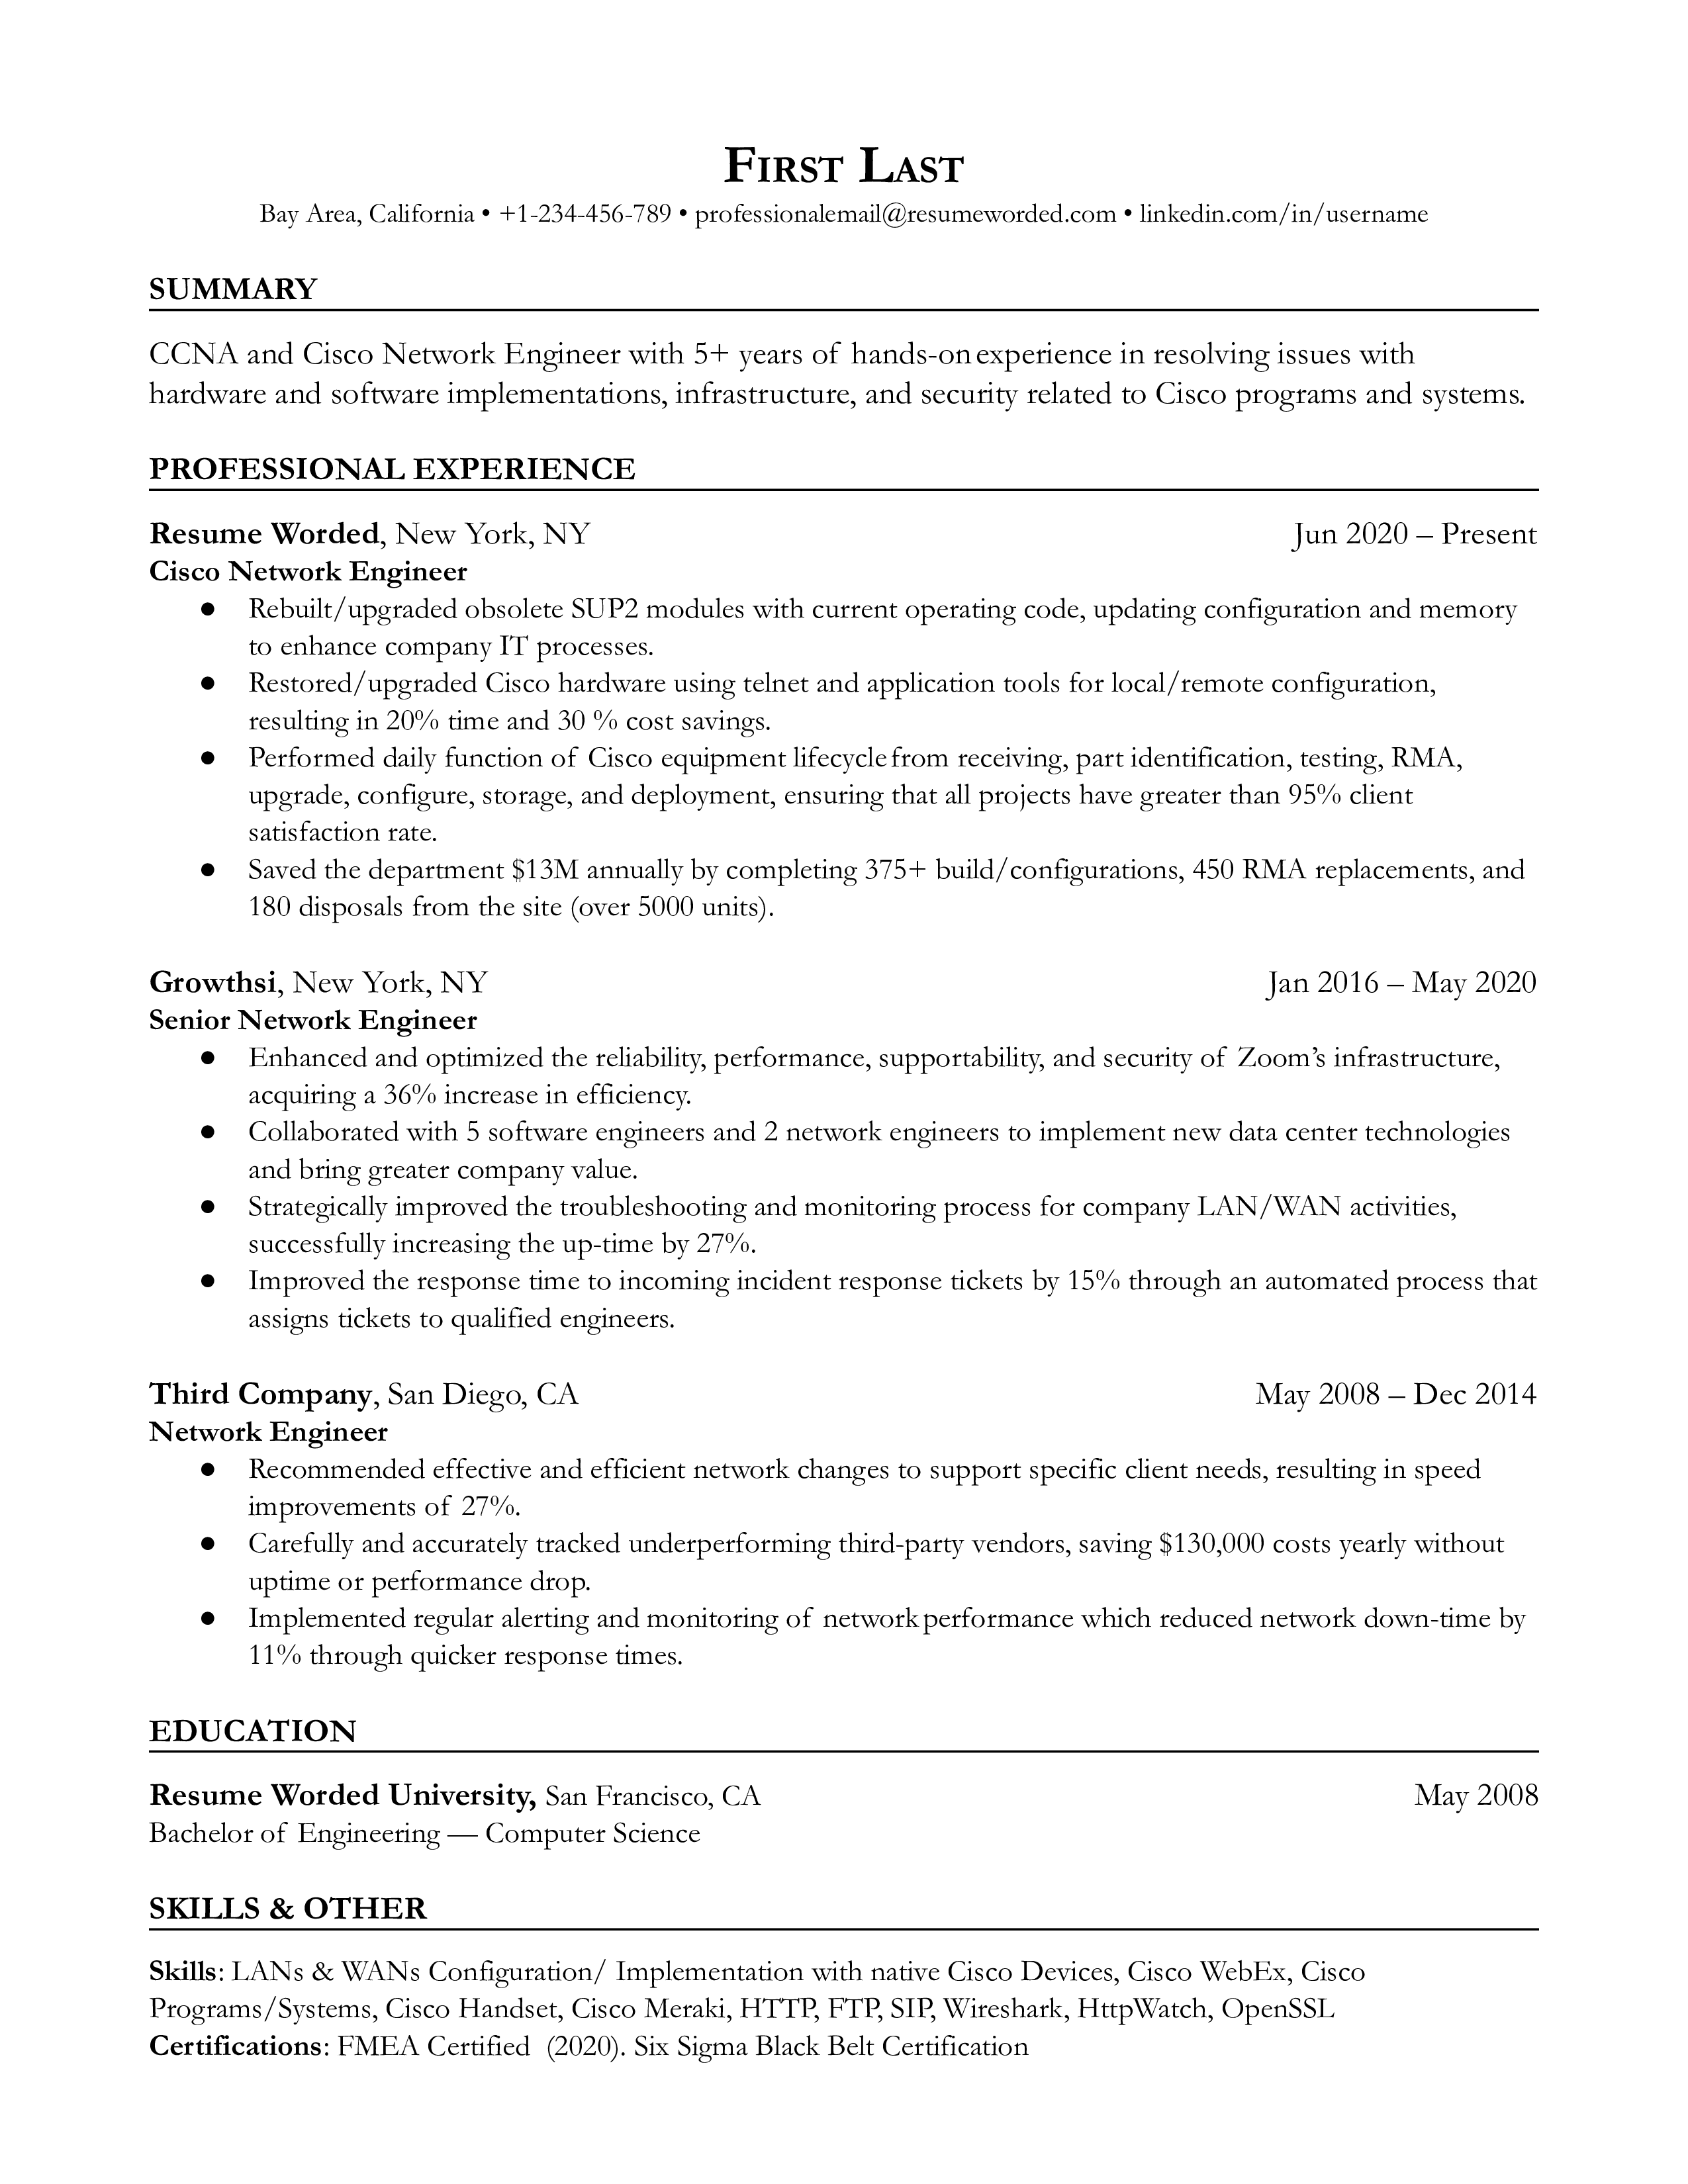 Cisco Network Engineer resume with certification and hands-on experience highlighted